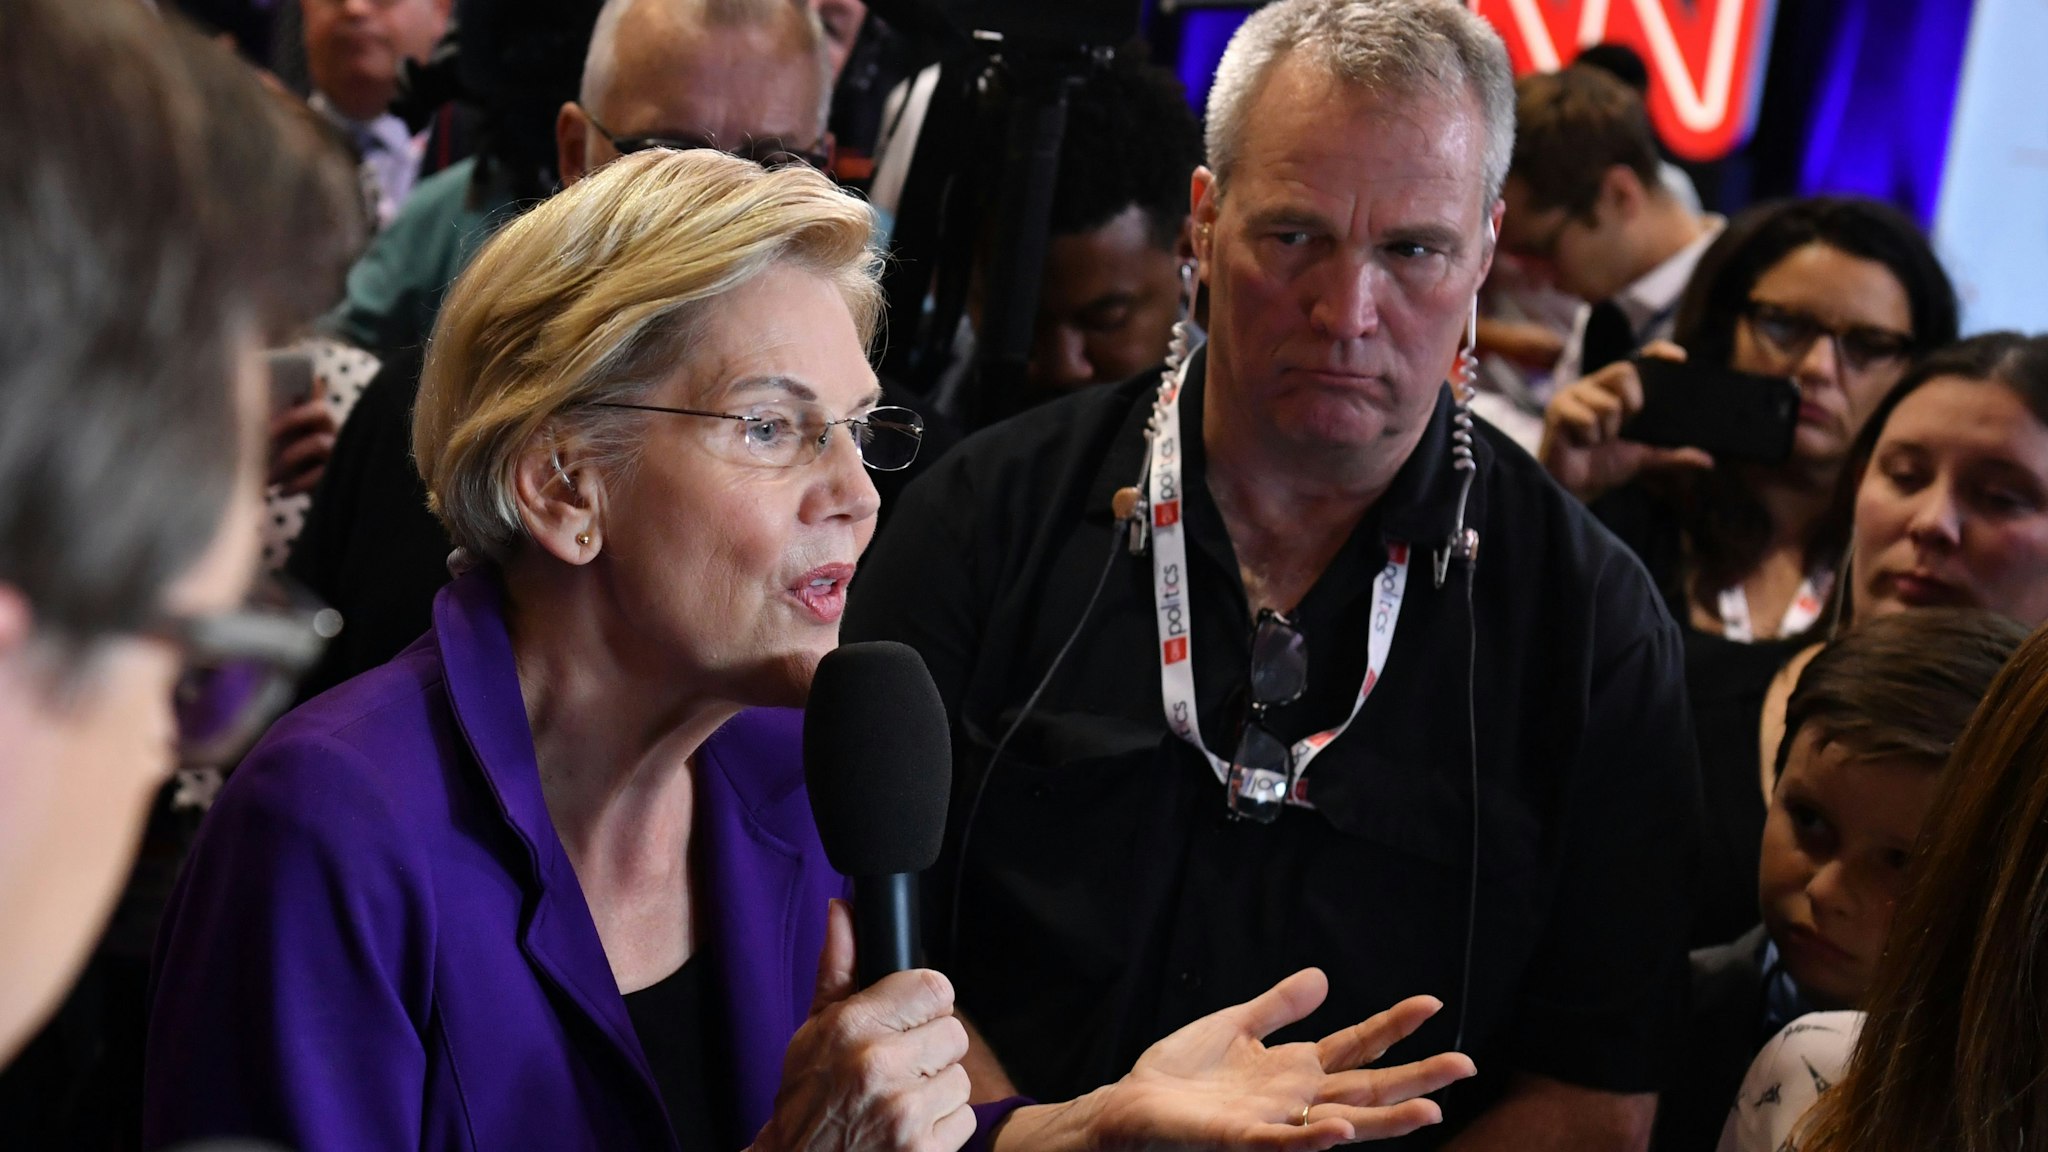 Democratic presidential hopeful Massachusetts Senator Elizabeth Warren speaks to the press in the spin room during the fourth Democratic primary debate of the 2020 presidential campaign season co-hosted by The New York Times and CNN at Otterbein University in Westerville, Ohio on October 15, 2019. (Photo by Nicholas Kamm / AFP) (Photo by NICHOLAS KAMM/AFP via Getty Images)